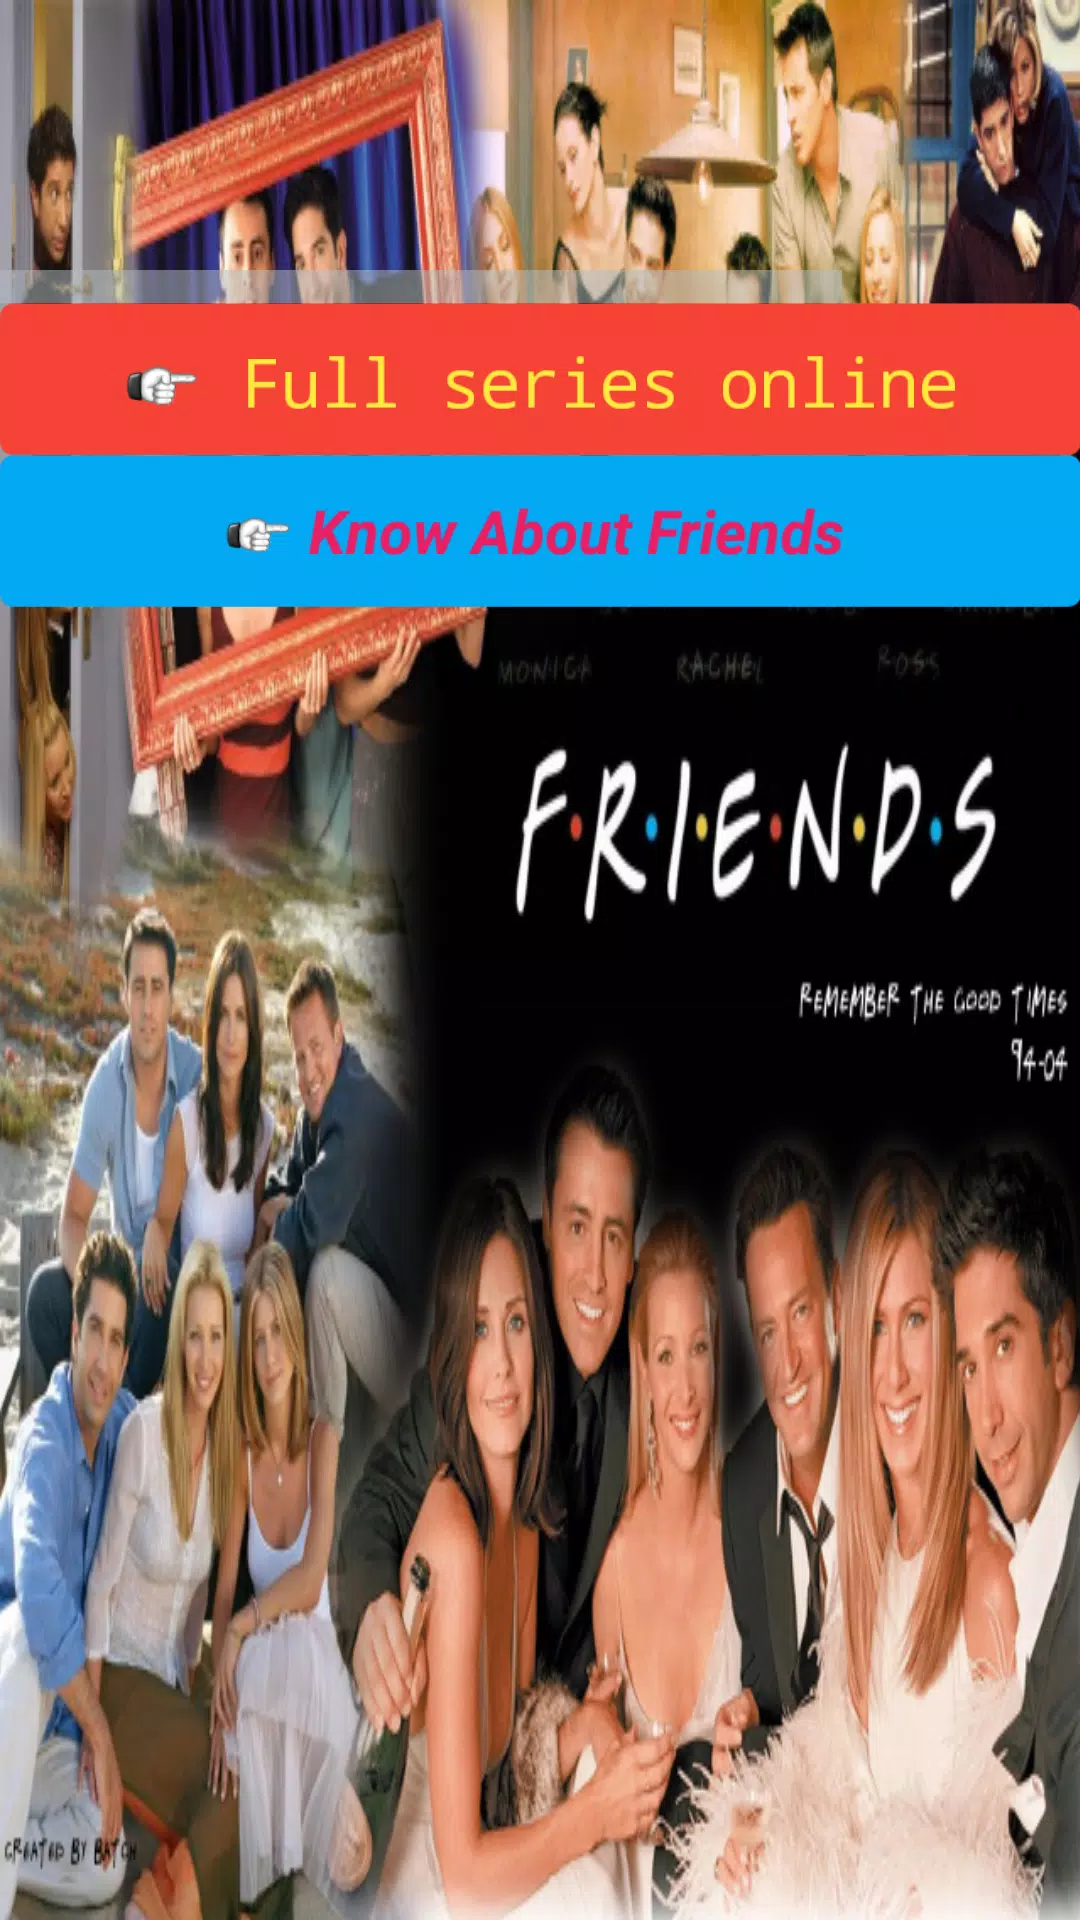 How To Watch Friends Series For Free? — All 10 Seasons Online